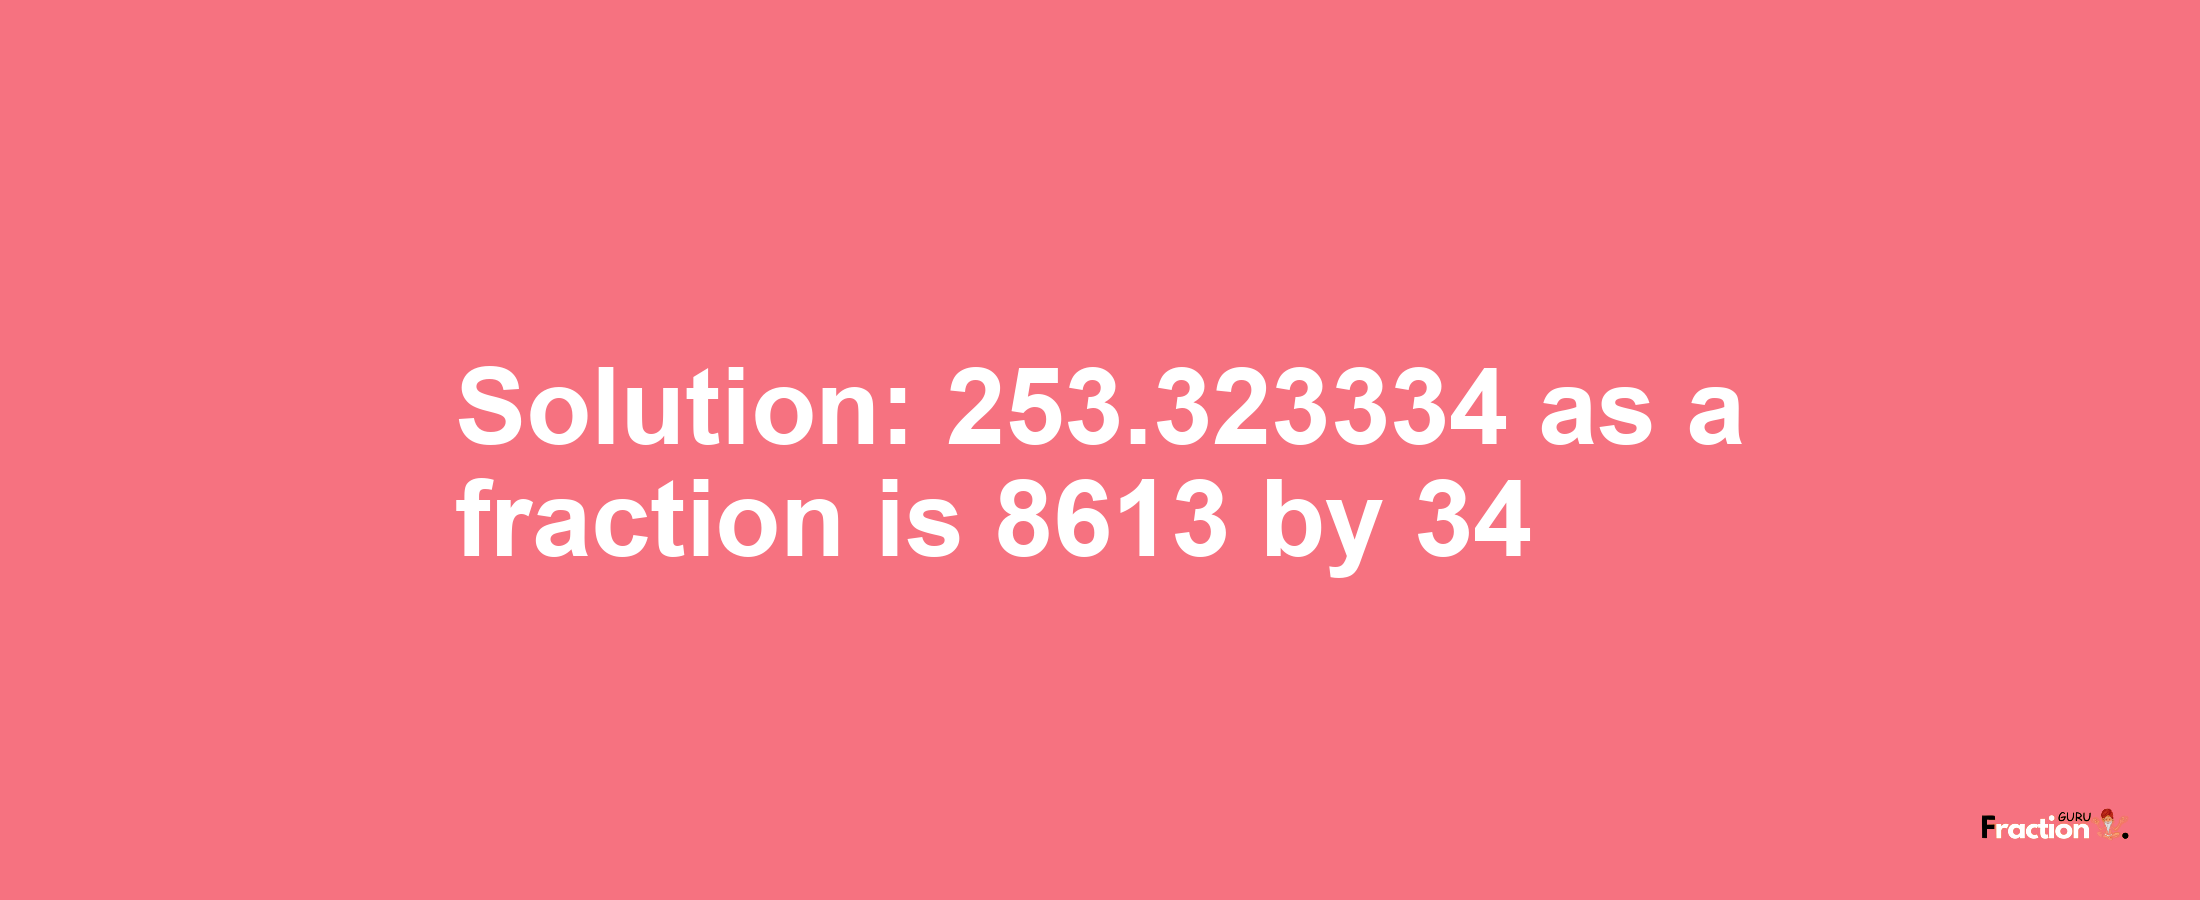 Solution:253.323334 as a fraction is 8613/34